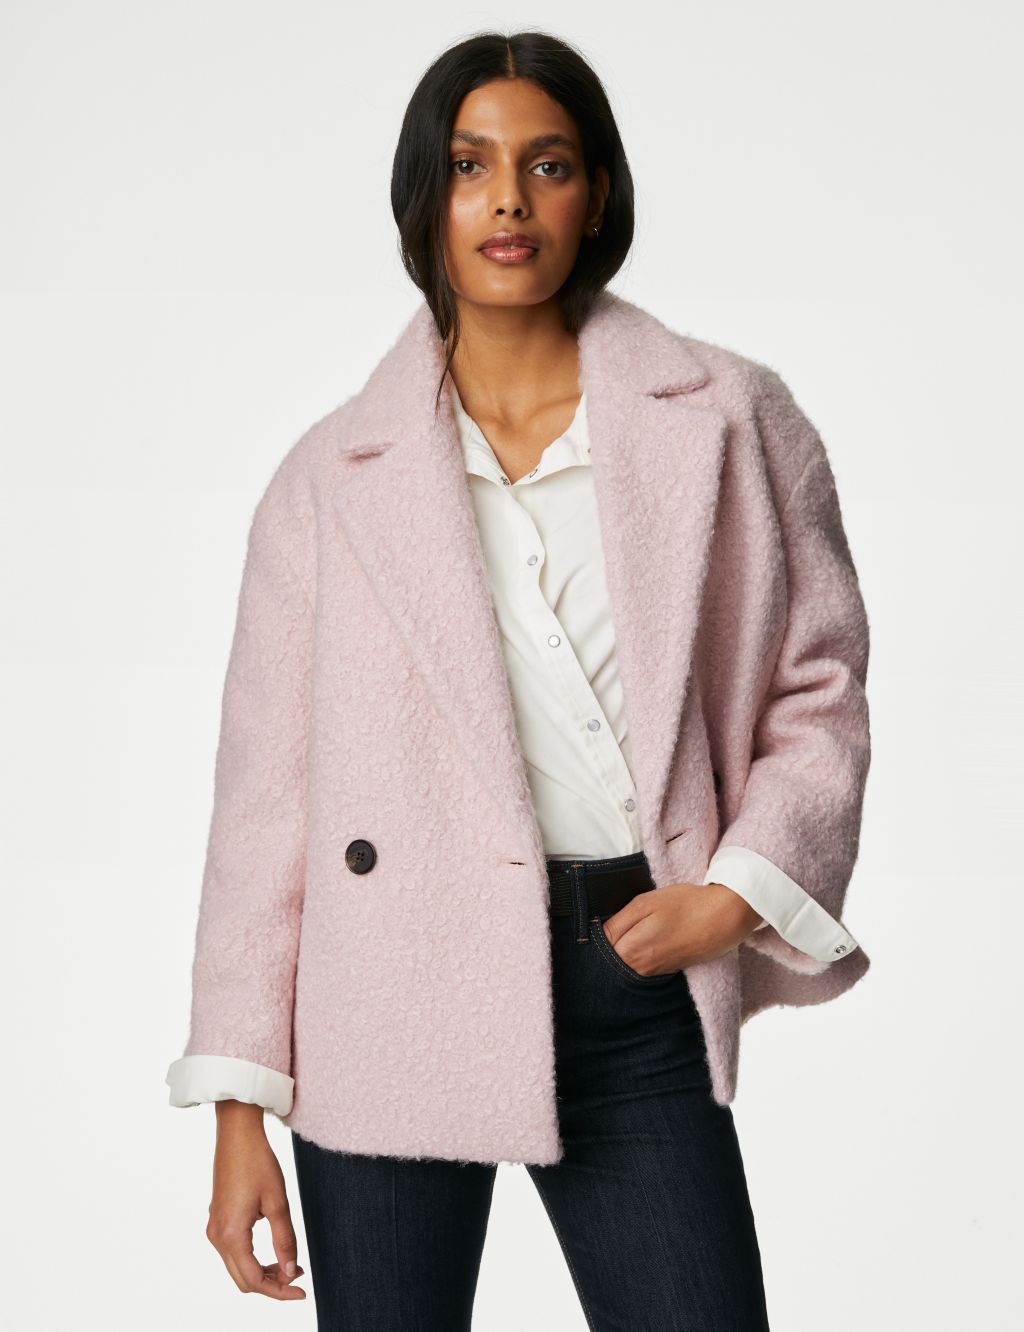 Textured Double Breasted Short Pea Coat